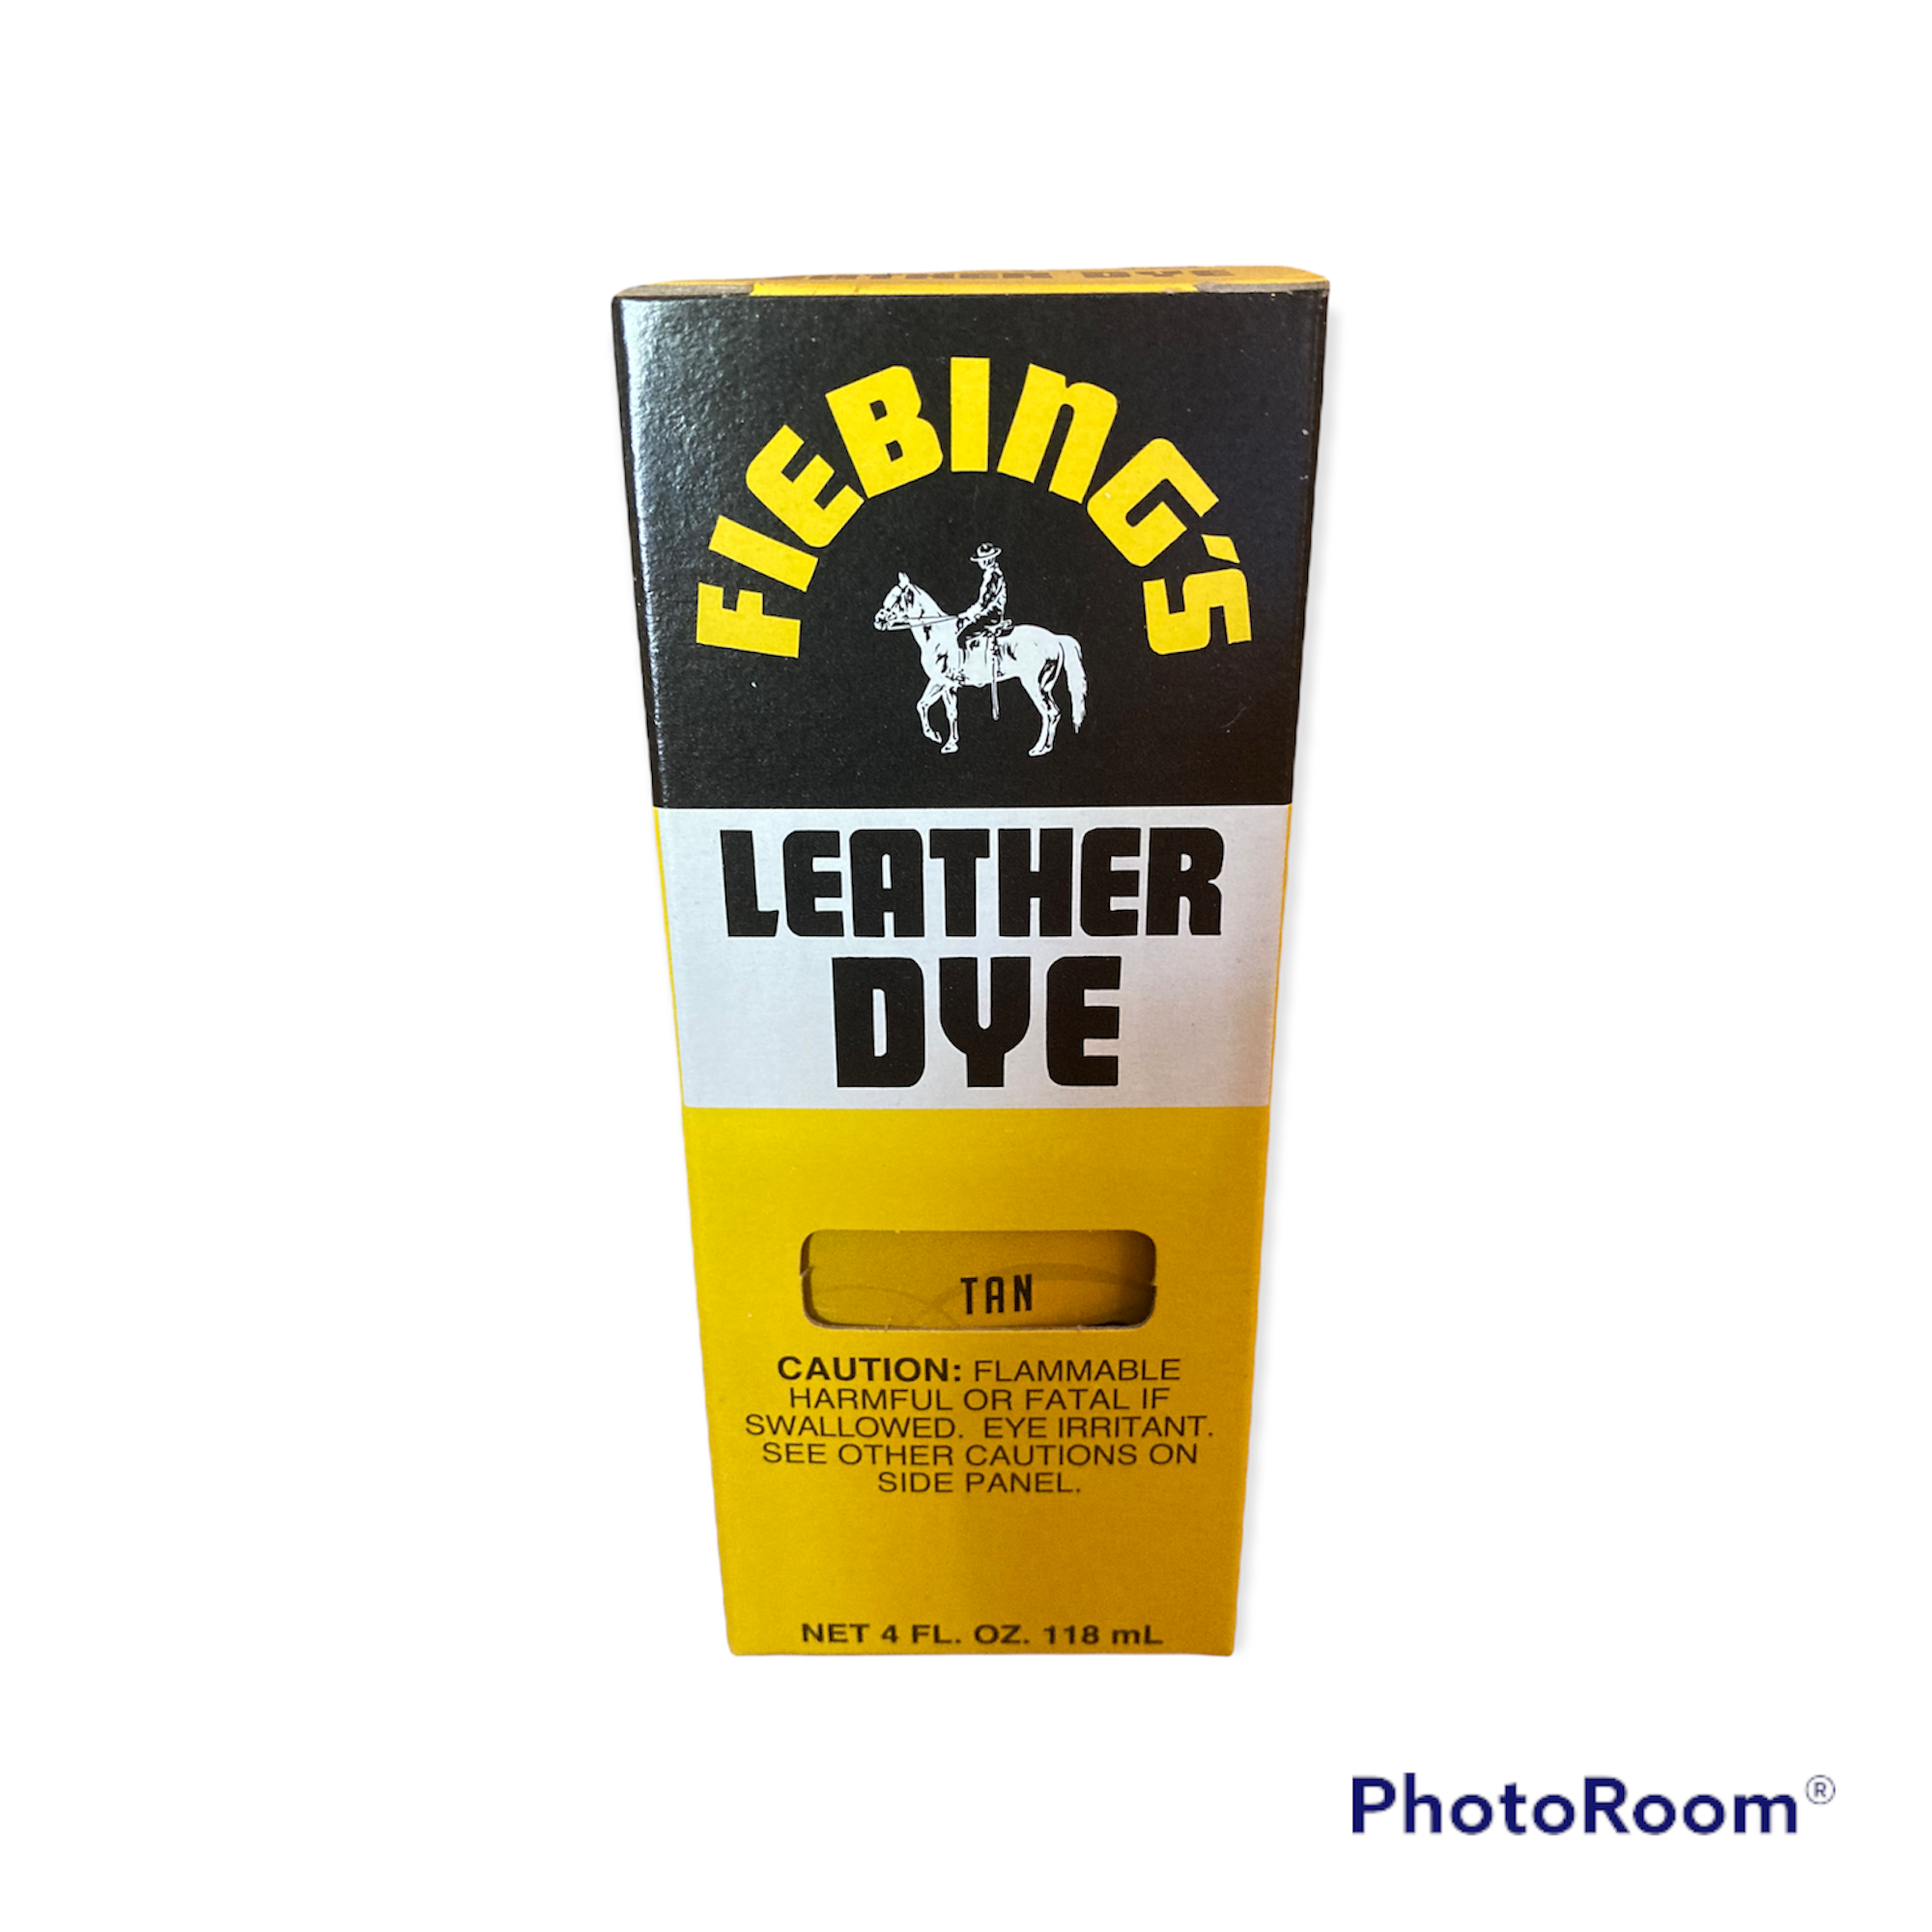 Fiebing's LeatherColors Leather Dye - Water-Based ☆